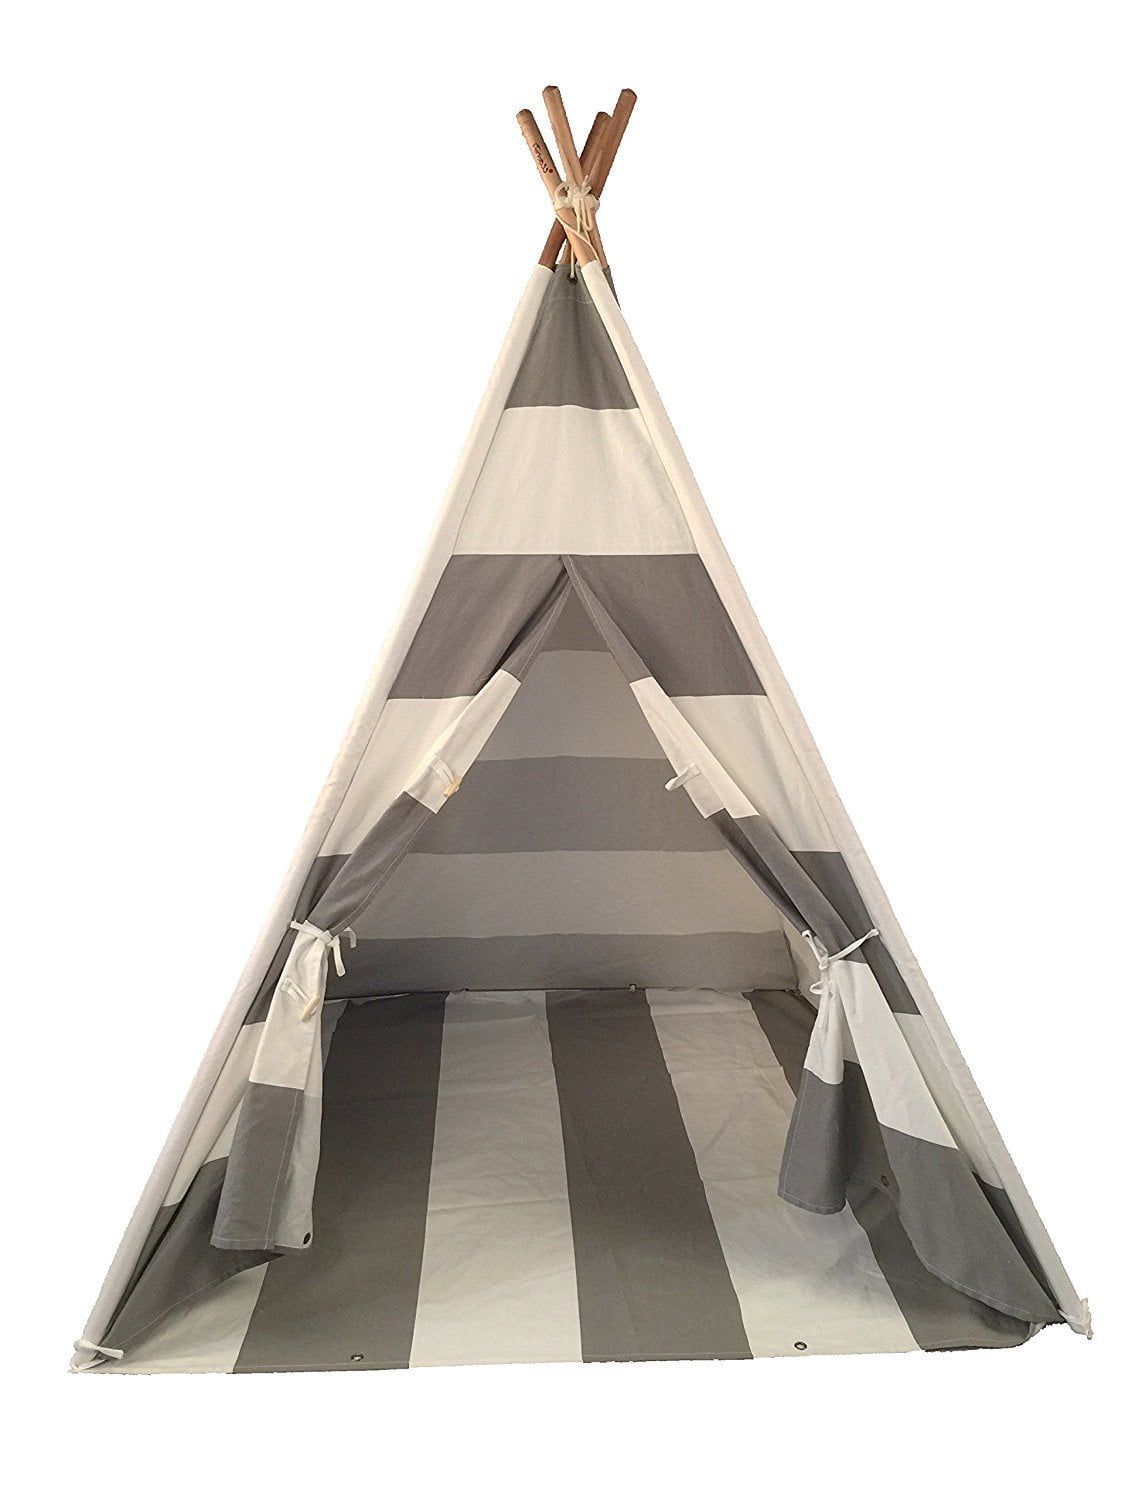 Blue Funkatron Indoor Indian Playhouse Toy Teepee Play Tent for Kids with Carry Case 